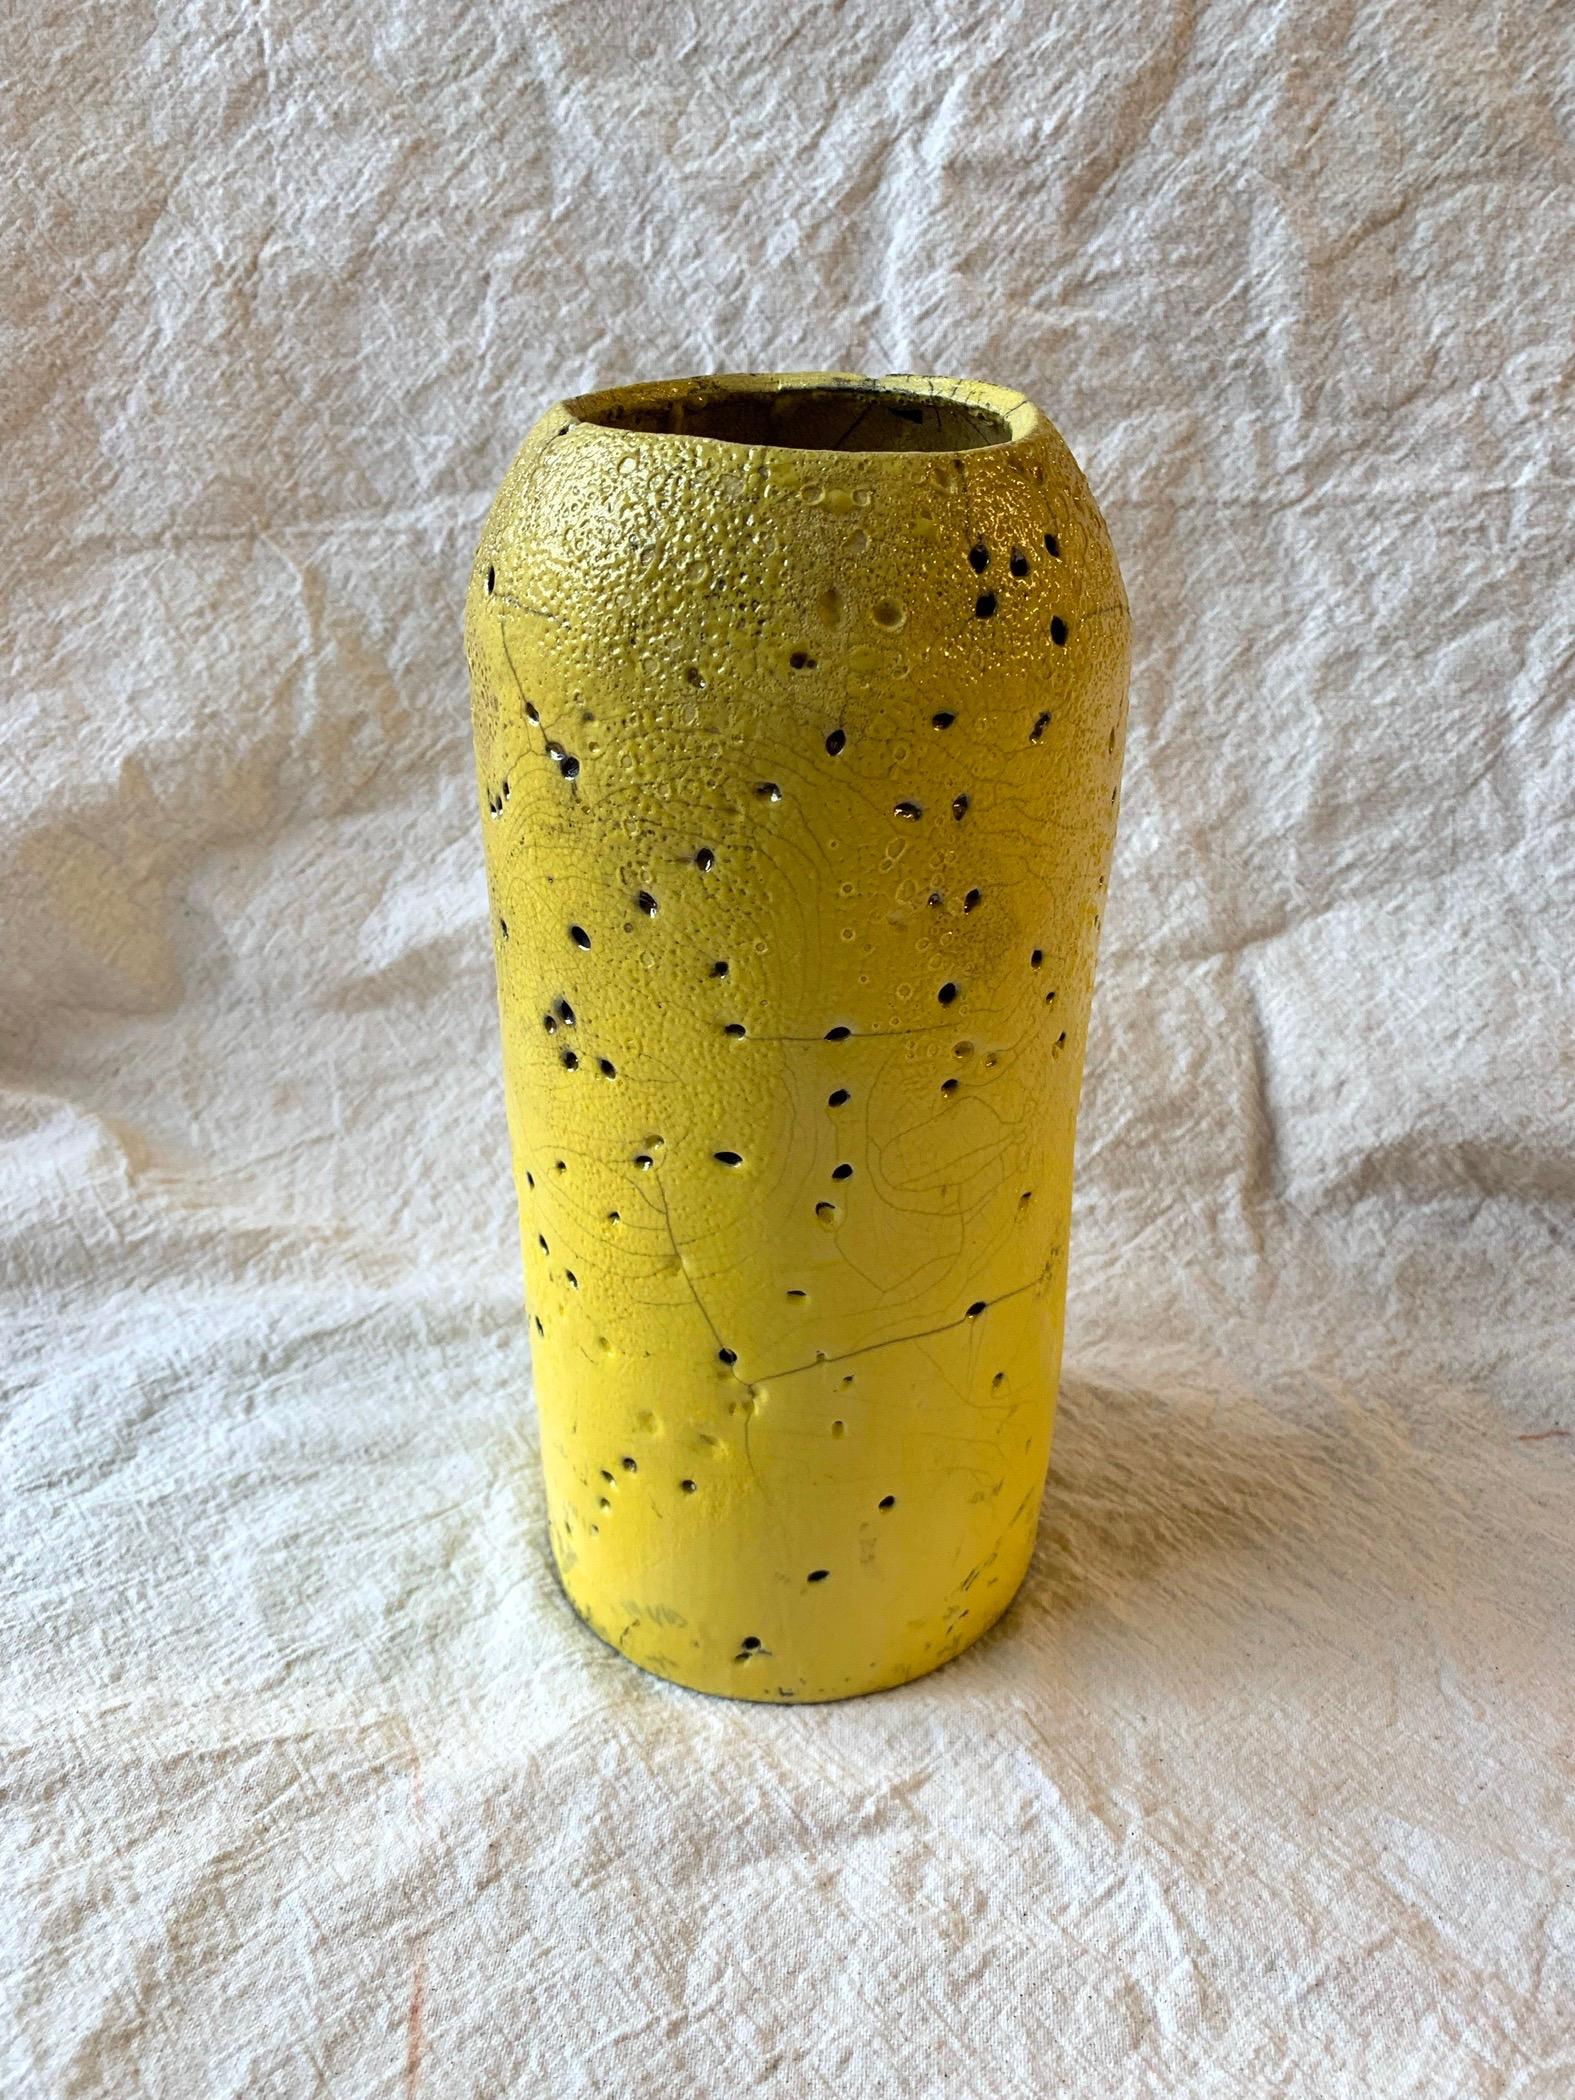 This is a hand-built (slab-constructed) stoneware vase made in Brooklyn and Raku-fired in New Jersey. The texture is the result of the building and firing: coriander seeds were impressed onto the fresh clay to create a pitted surface, and the glaze